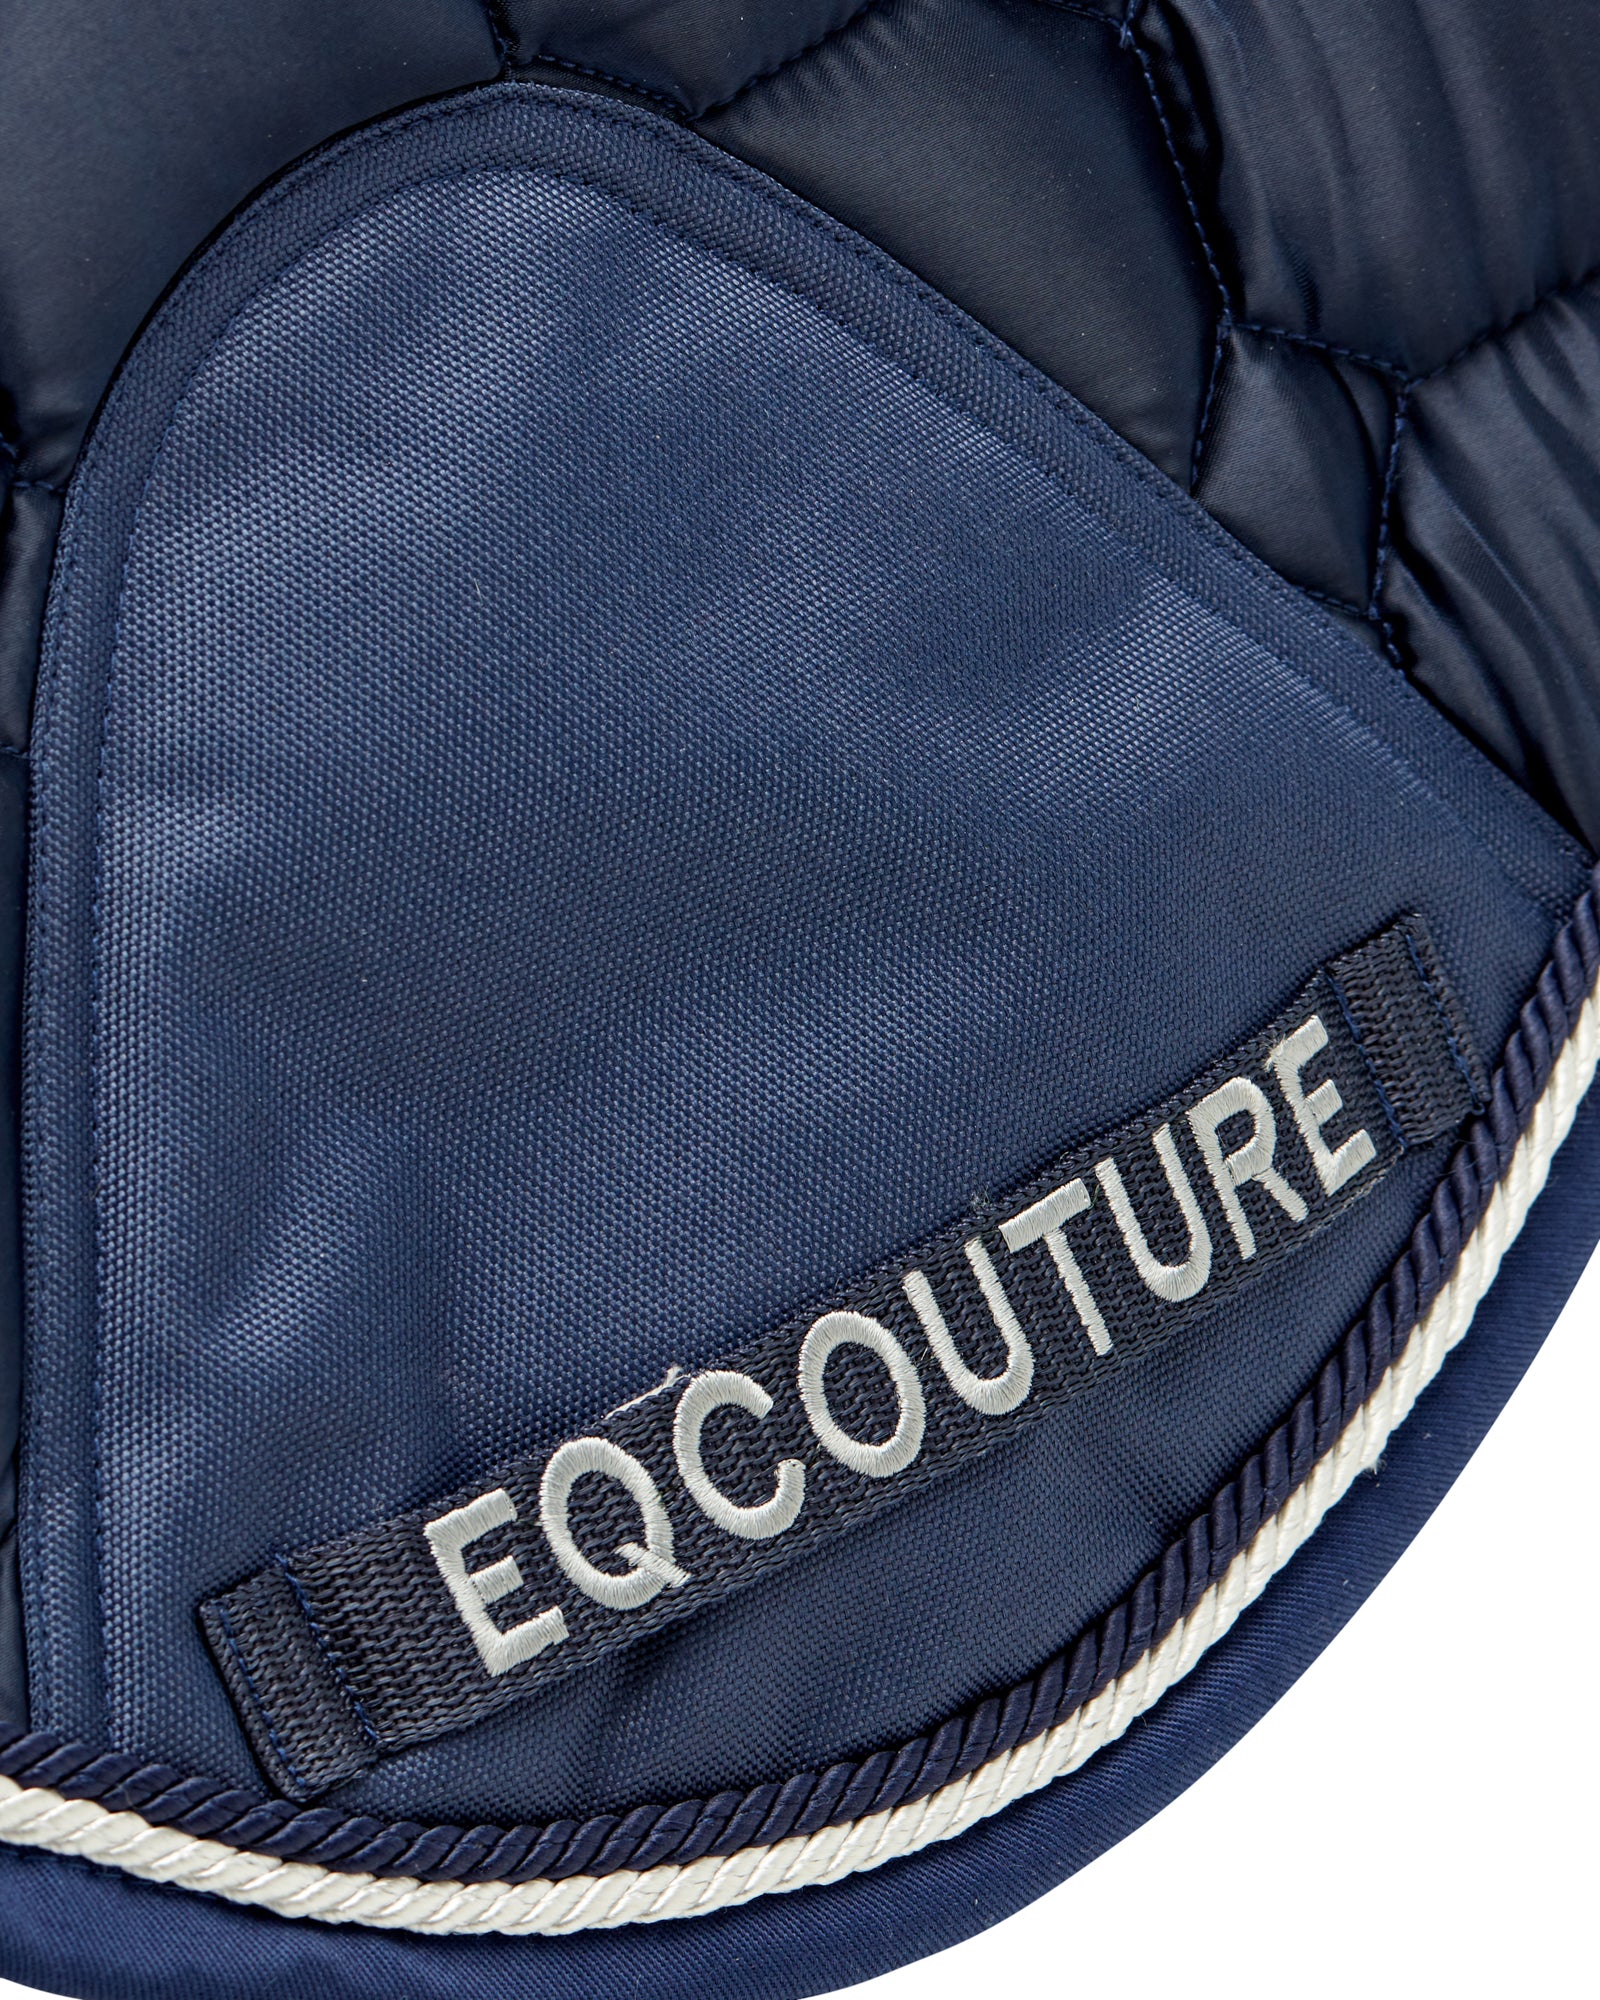 Equestrian luxury quilted navy satin jumping cut saddle pads/numnahs.